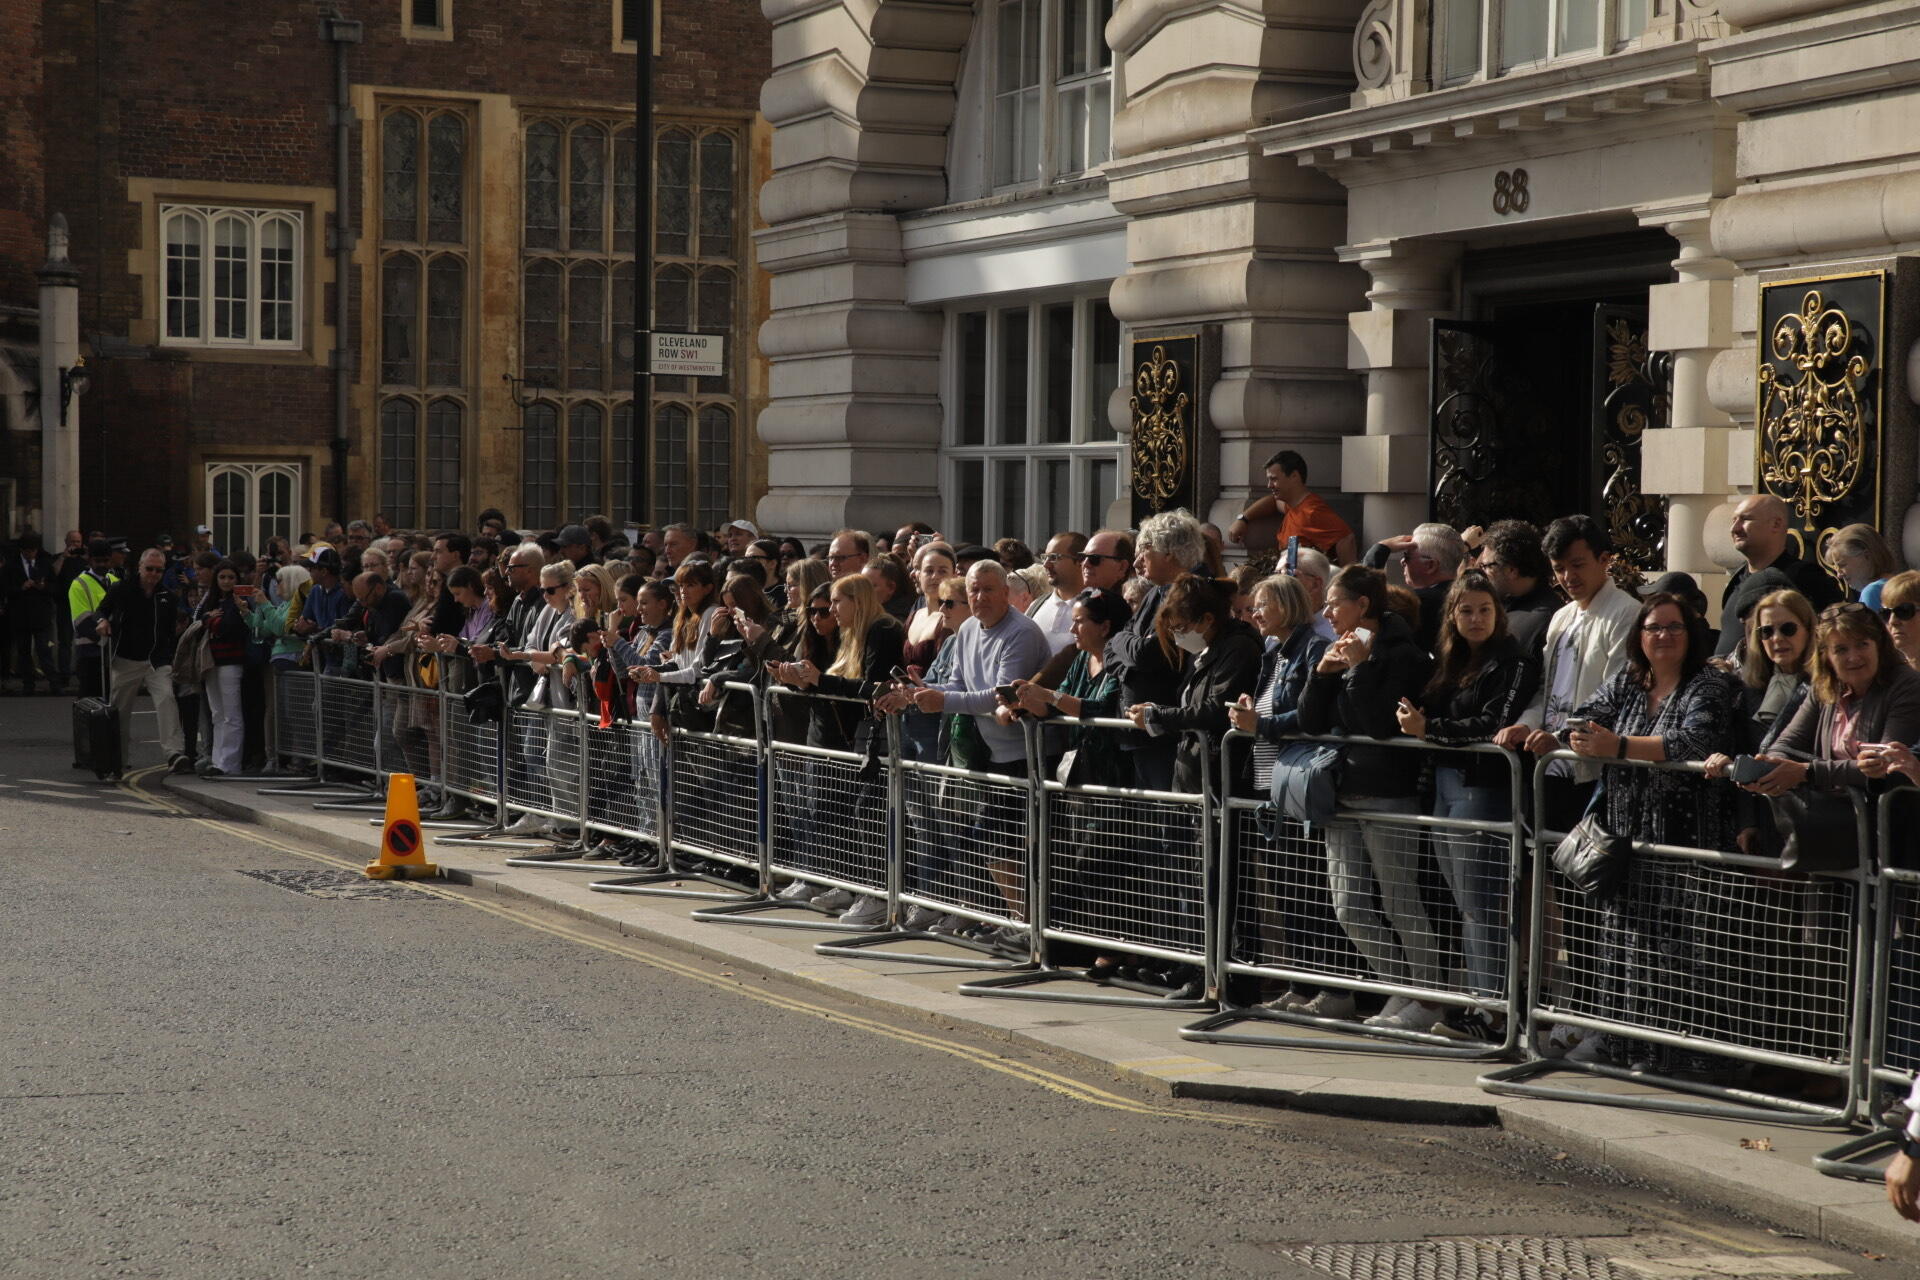 Crowds wait outside St James's Palace during the proclamation of King Charles III in London on the morning of September 10, 2022.